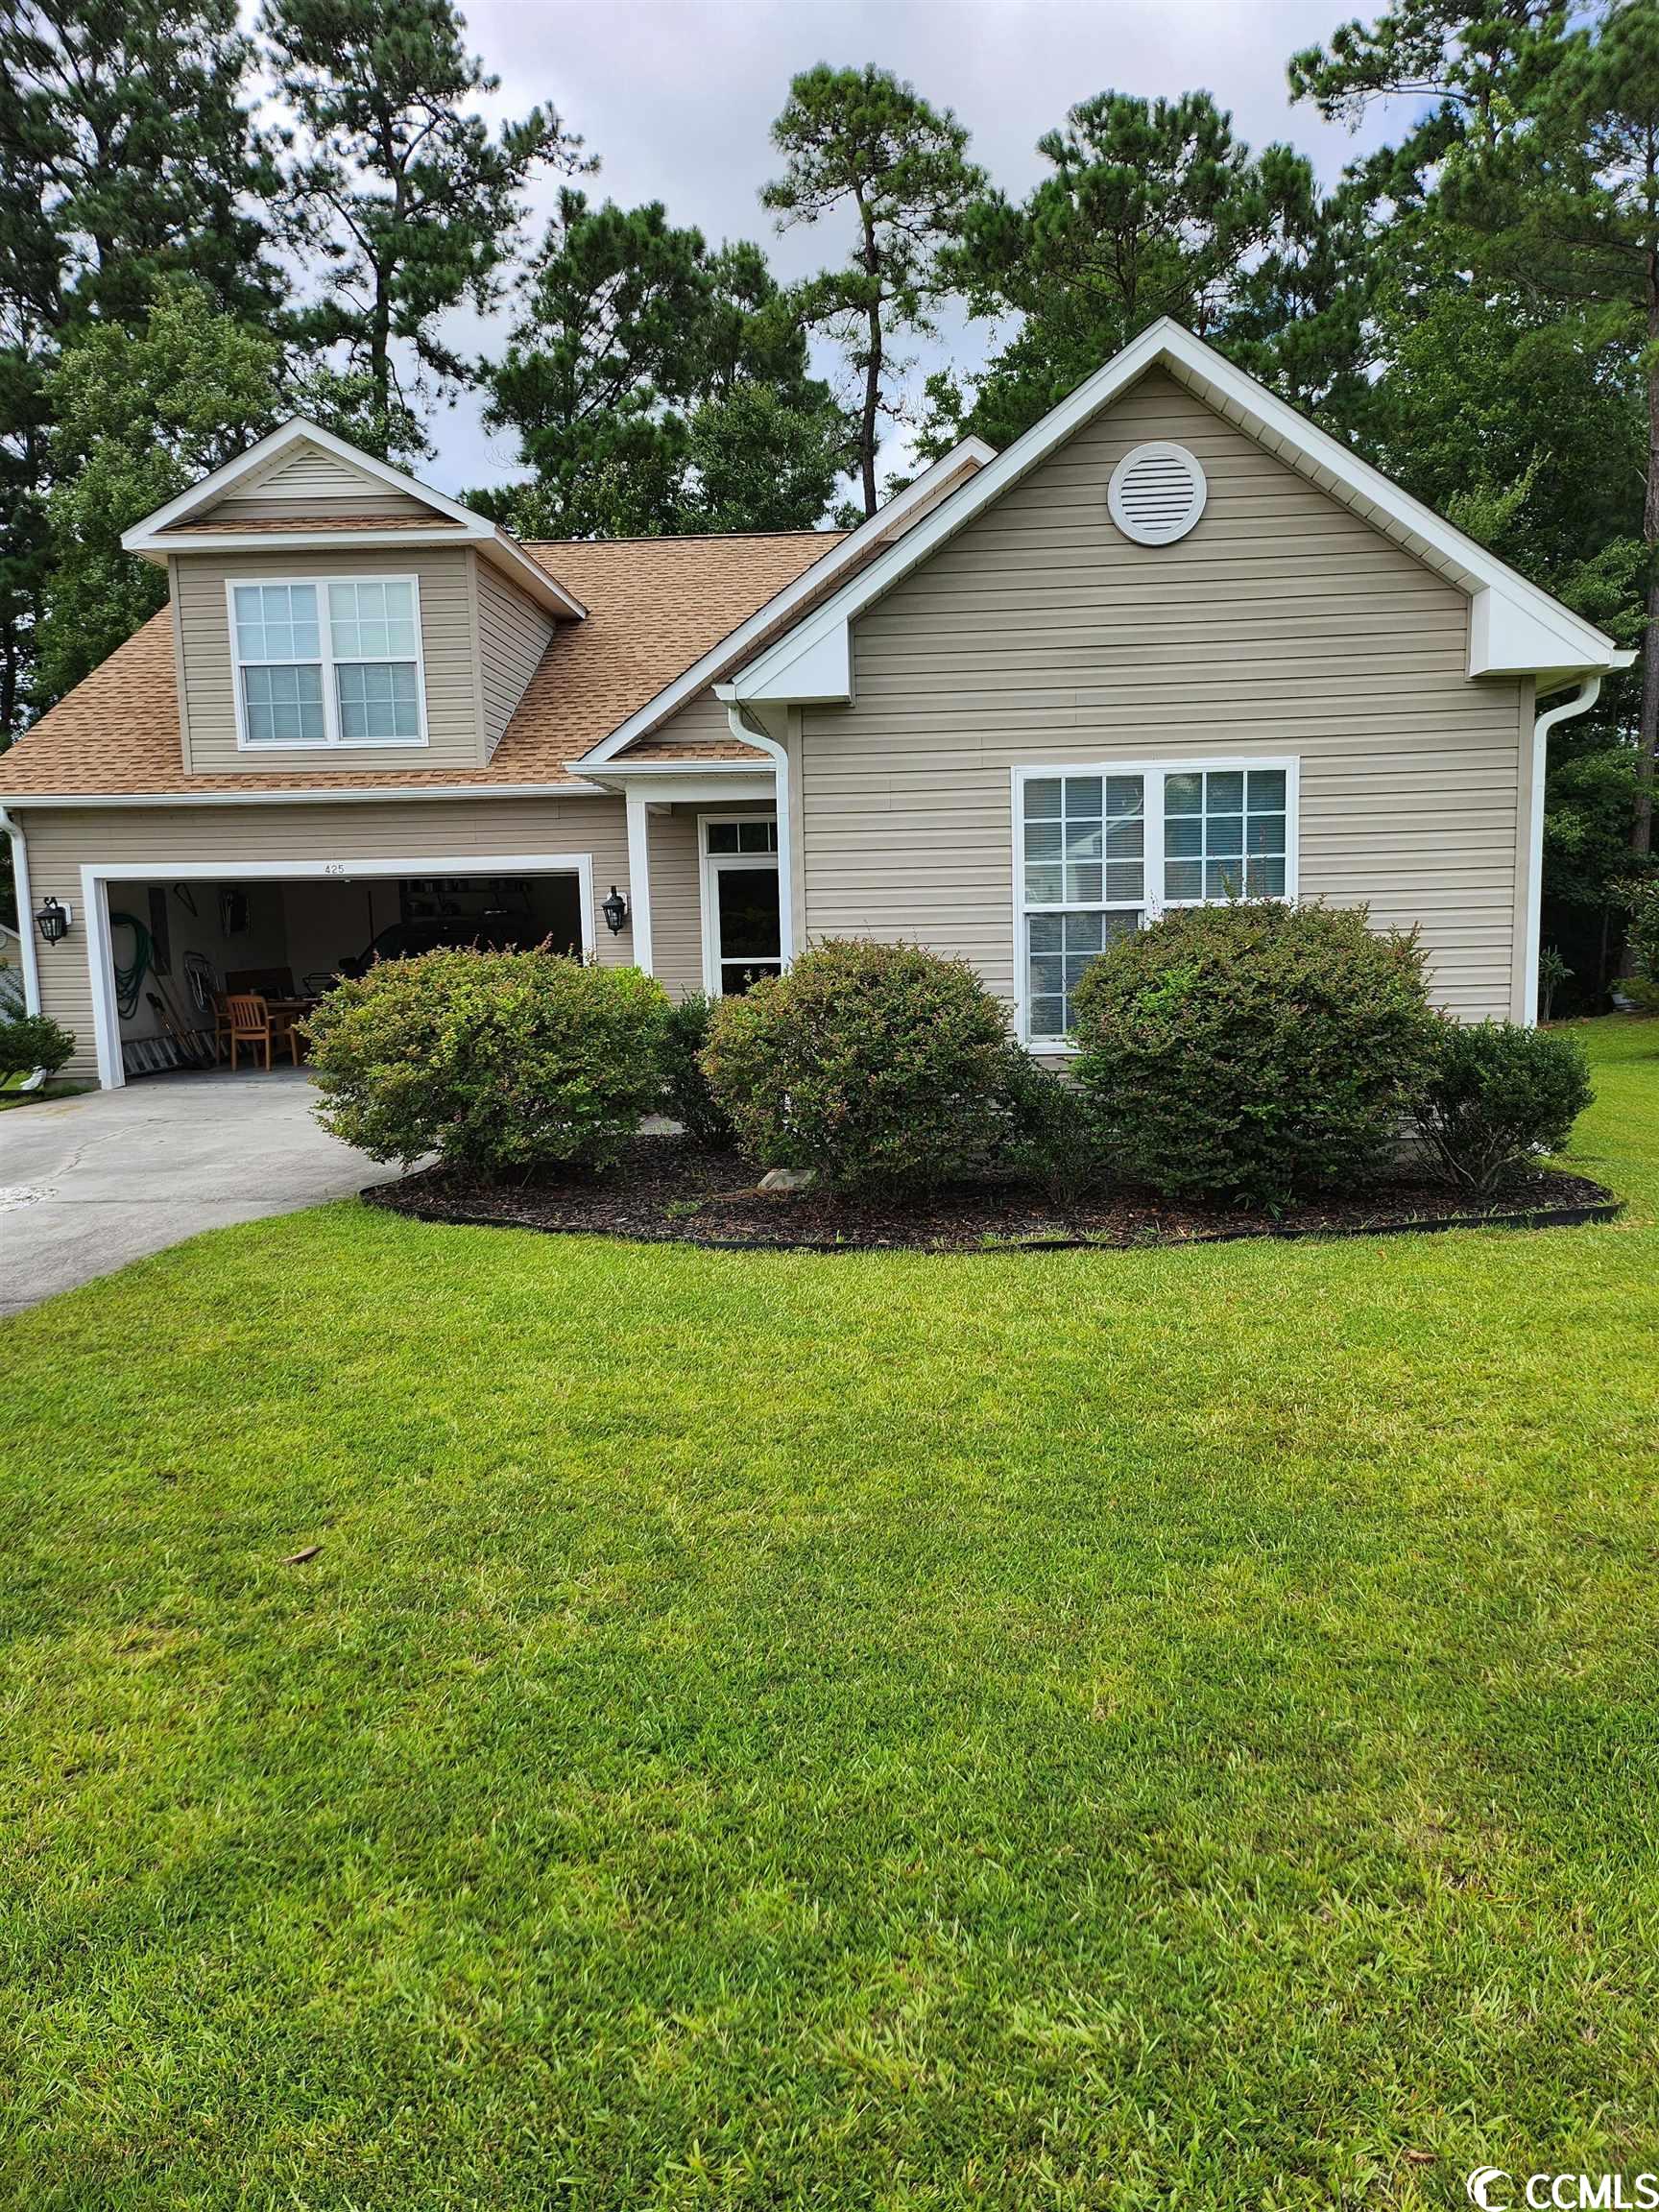 425 Cypress View Ave. Little River, SC 29566